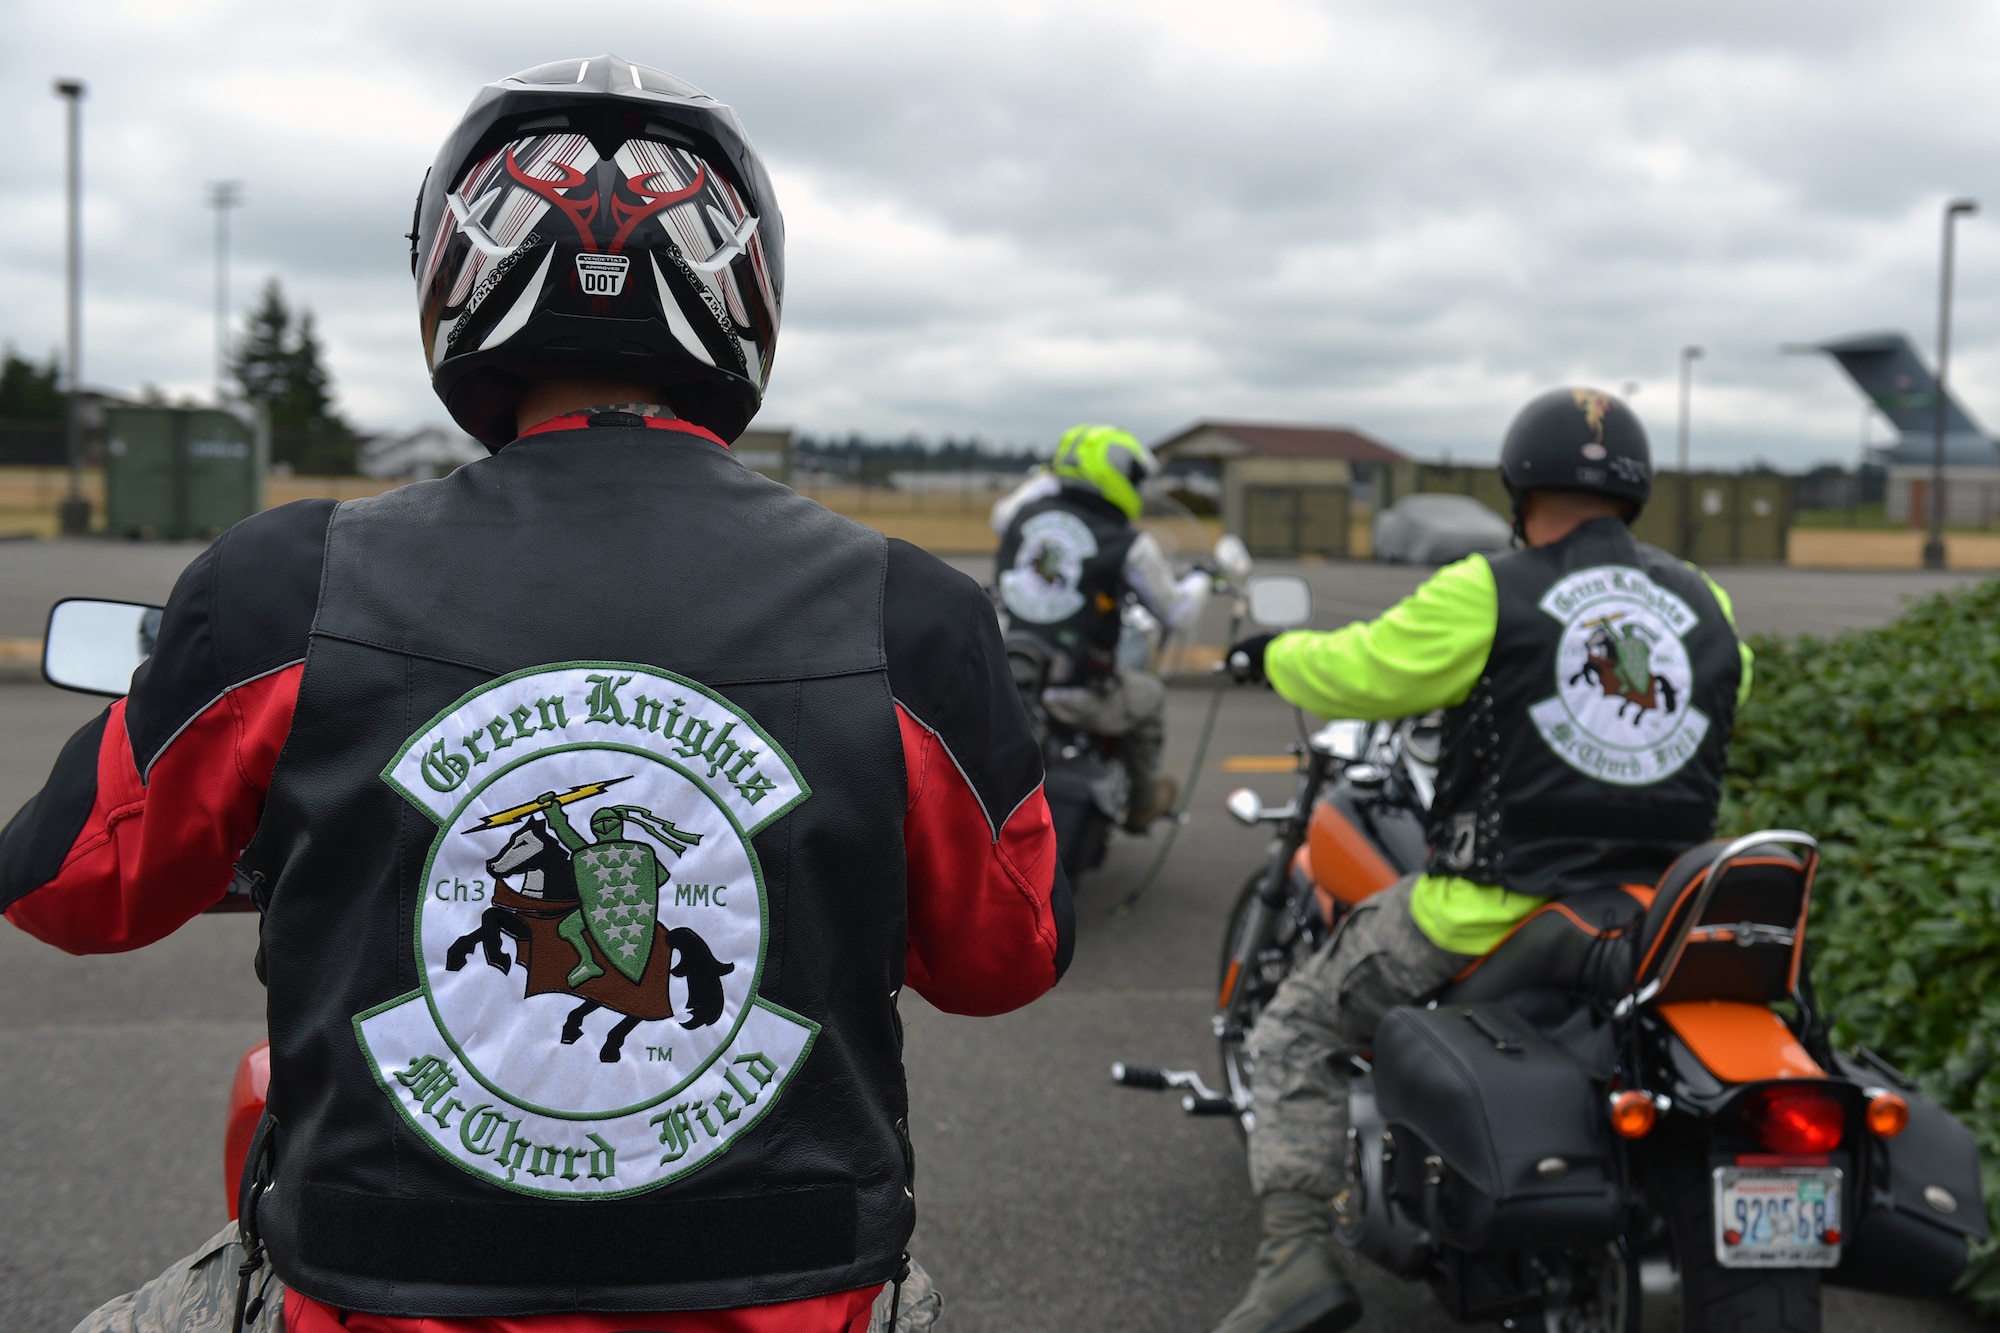 Airman 1st Class Orrin Fenwick, 62nd Aircraft Maintenance Squadron crew chief and member of the Green Knights Military Motorcycle Club Chapter 3, follows fellow members during a ride Aug. 1, 2013 at Joint Base Lewis-McChord, Wash. Originally established in 2000 to help promote motorcycle safety and fight for rider‘s rights, GKMMC Chapter 3 is one of the first established chapters of 113 chapters at different U.S. military bases worldwide. (U.S. Air Force photo/Airman 1st Class Jacob Jimenez)